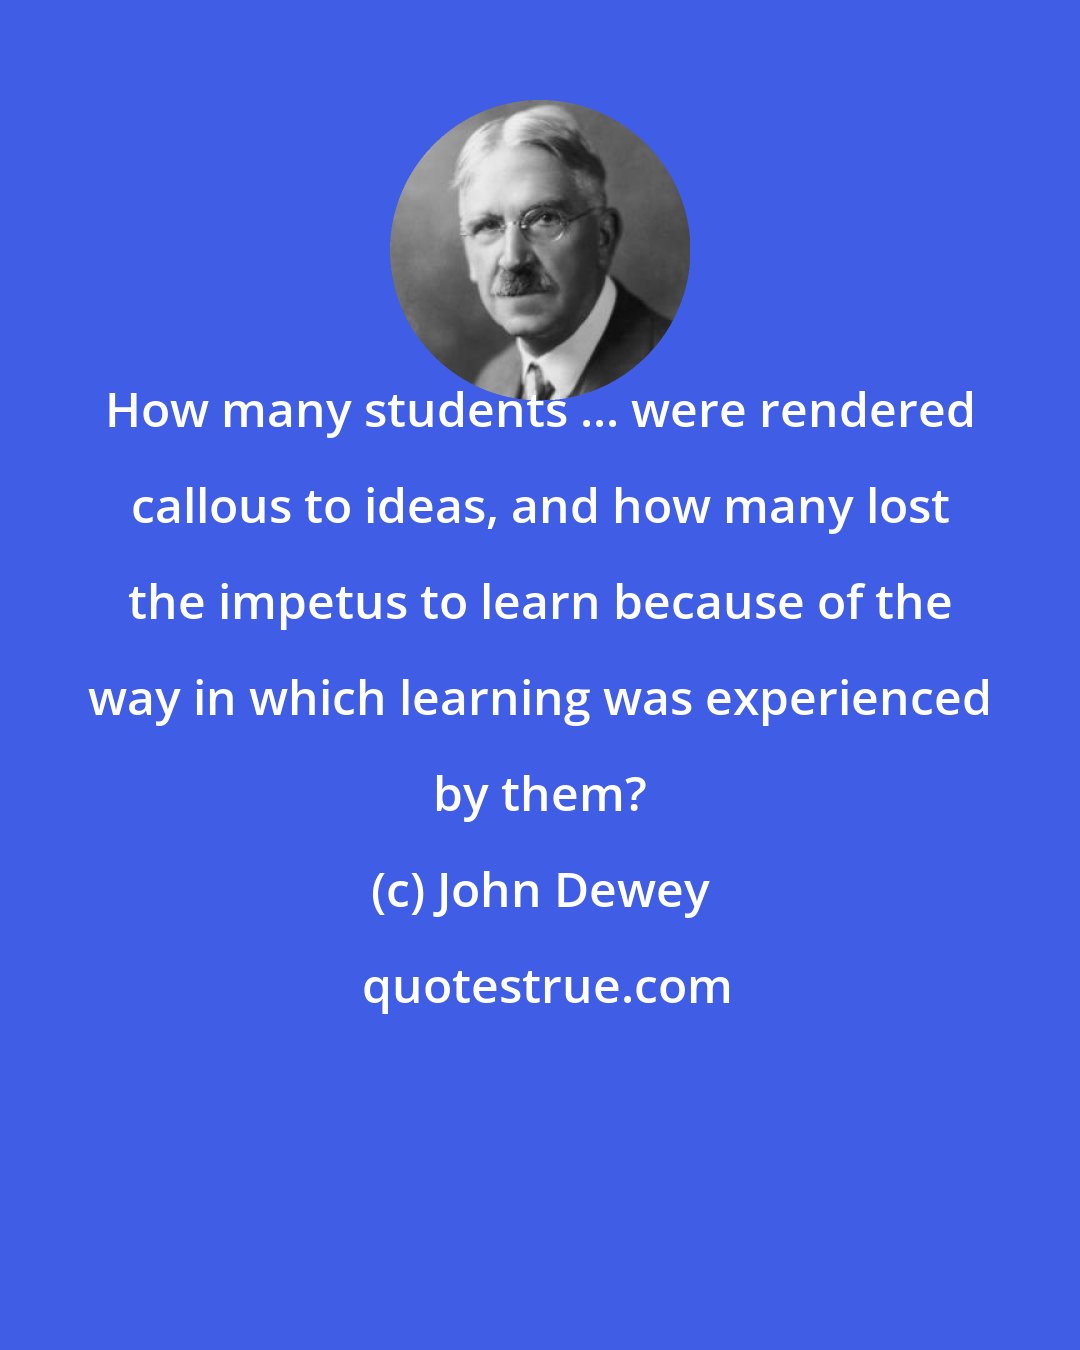 John Dewey: How many students ... were rendered callous to ideas, and how many lost the impetus to learn because of the way in which learning was experienced by them?